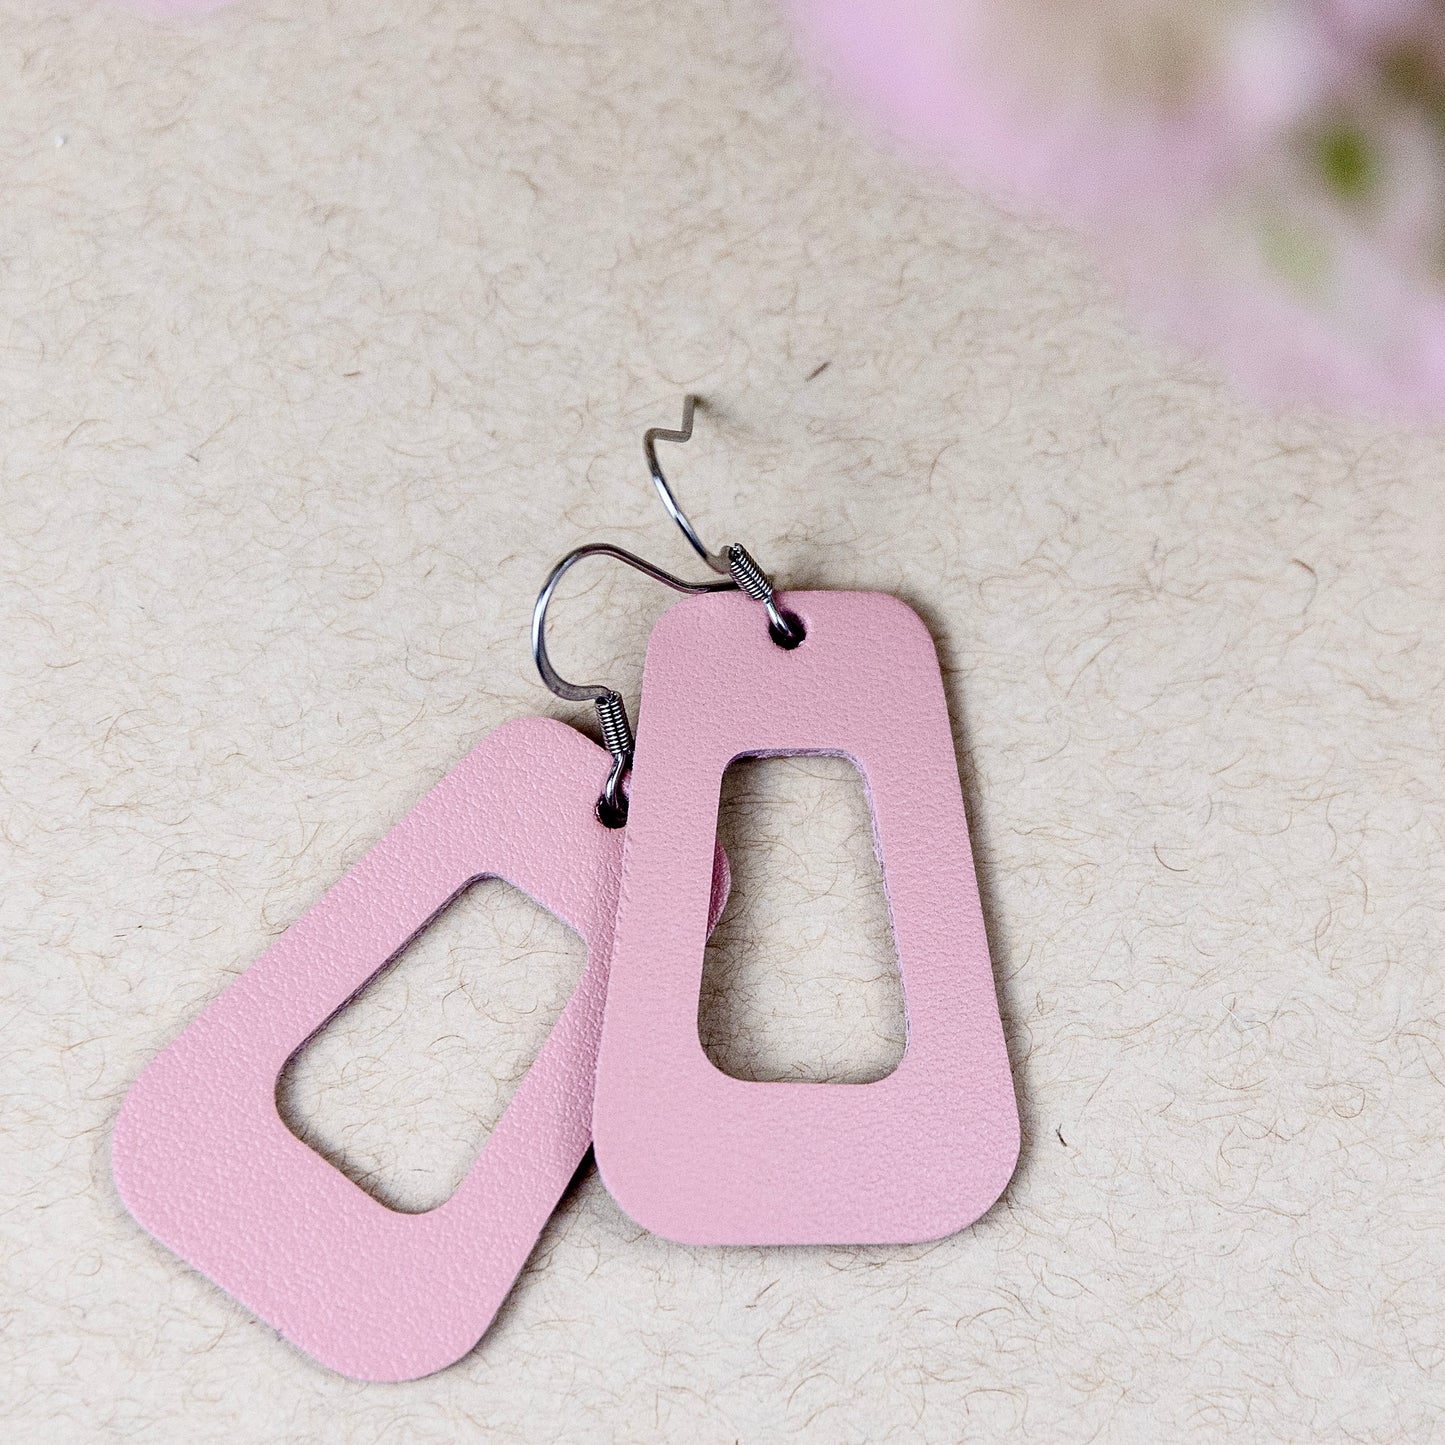 THE JUDY in Blush Pink/ Lightweight Leather Statement Earrings